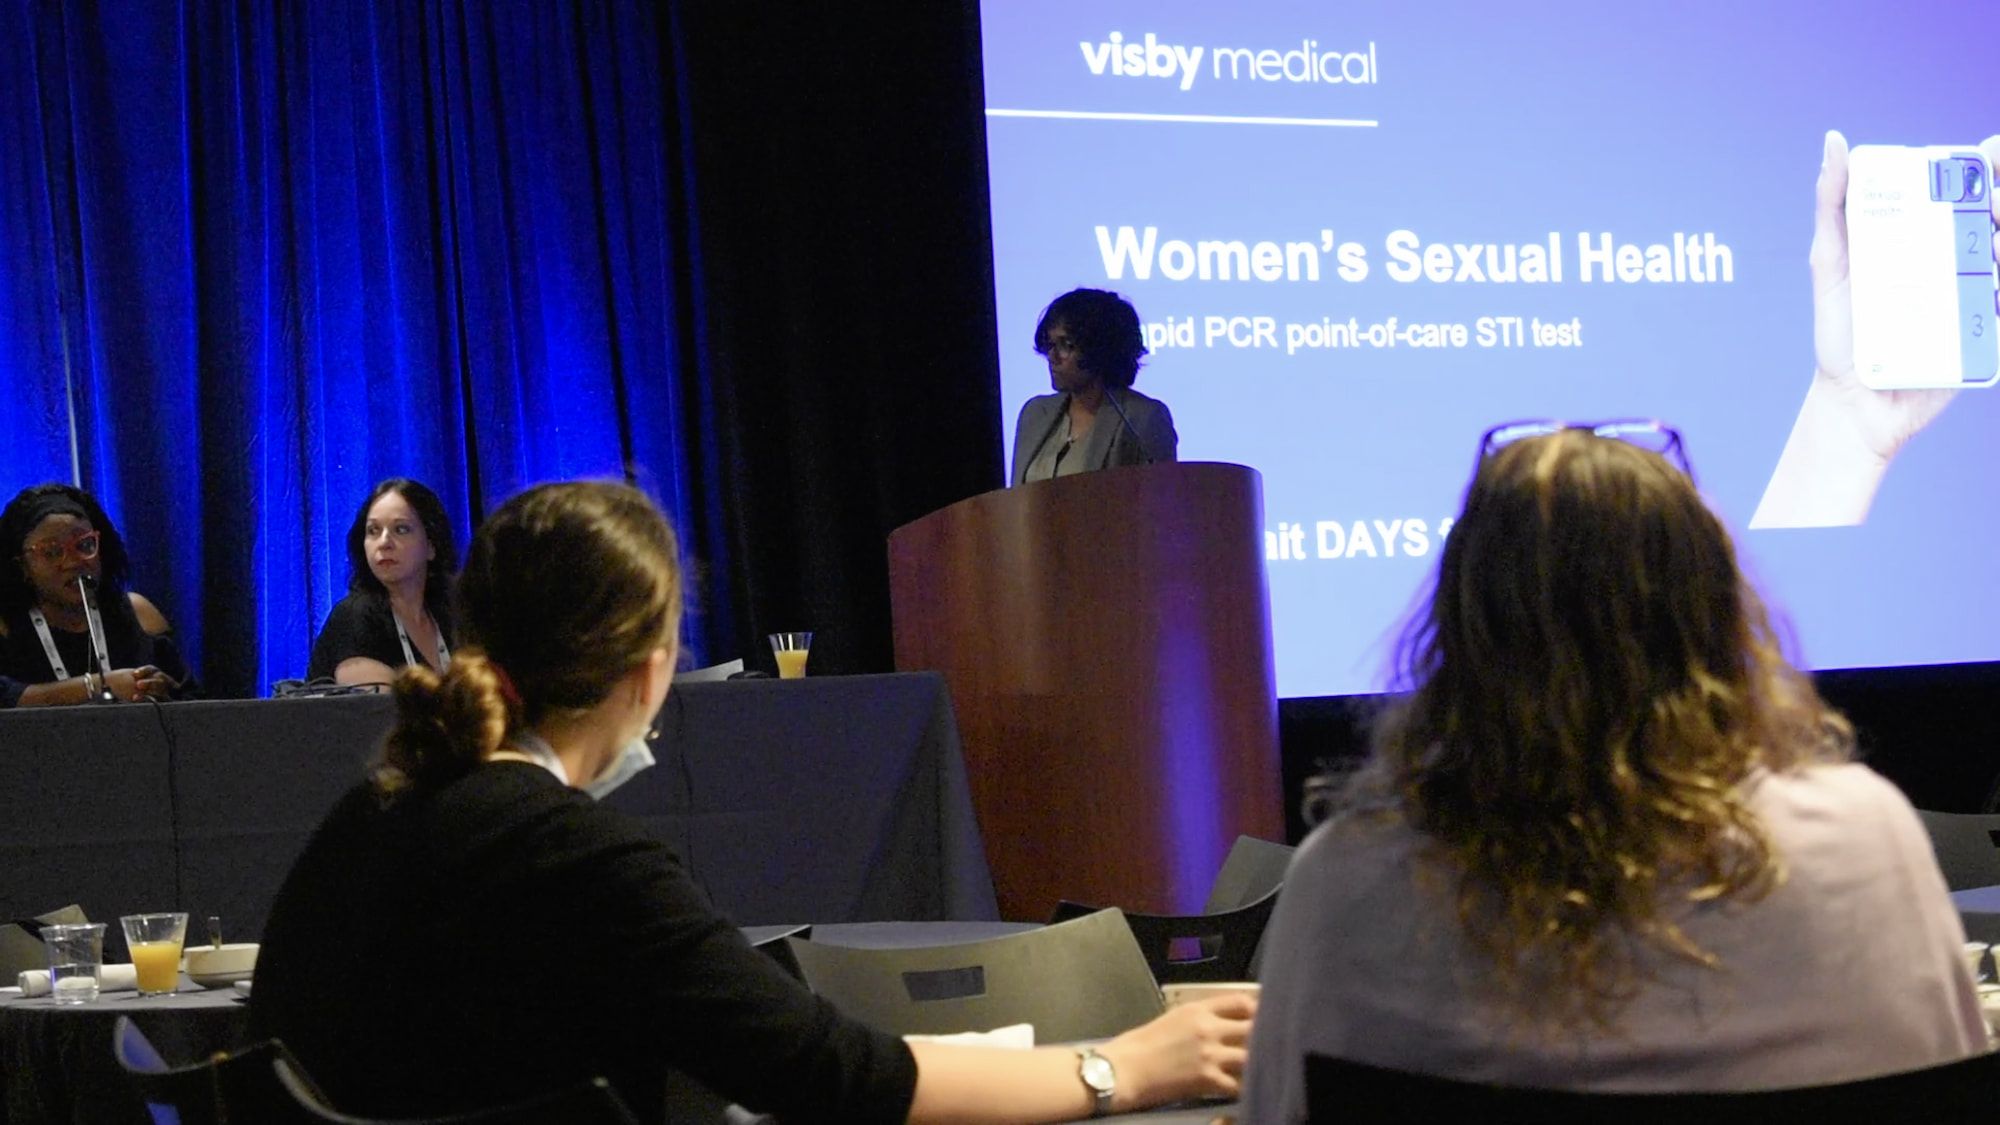 Video Highlights from Visby Medical’s Breakfast Panel at 2022 IDSOG Annual Meeting